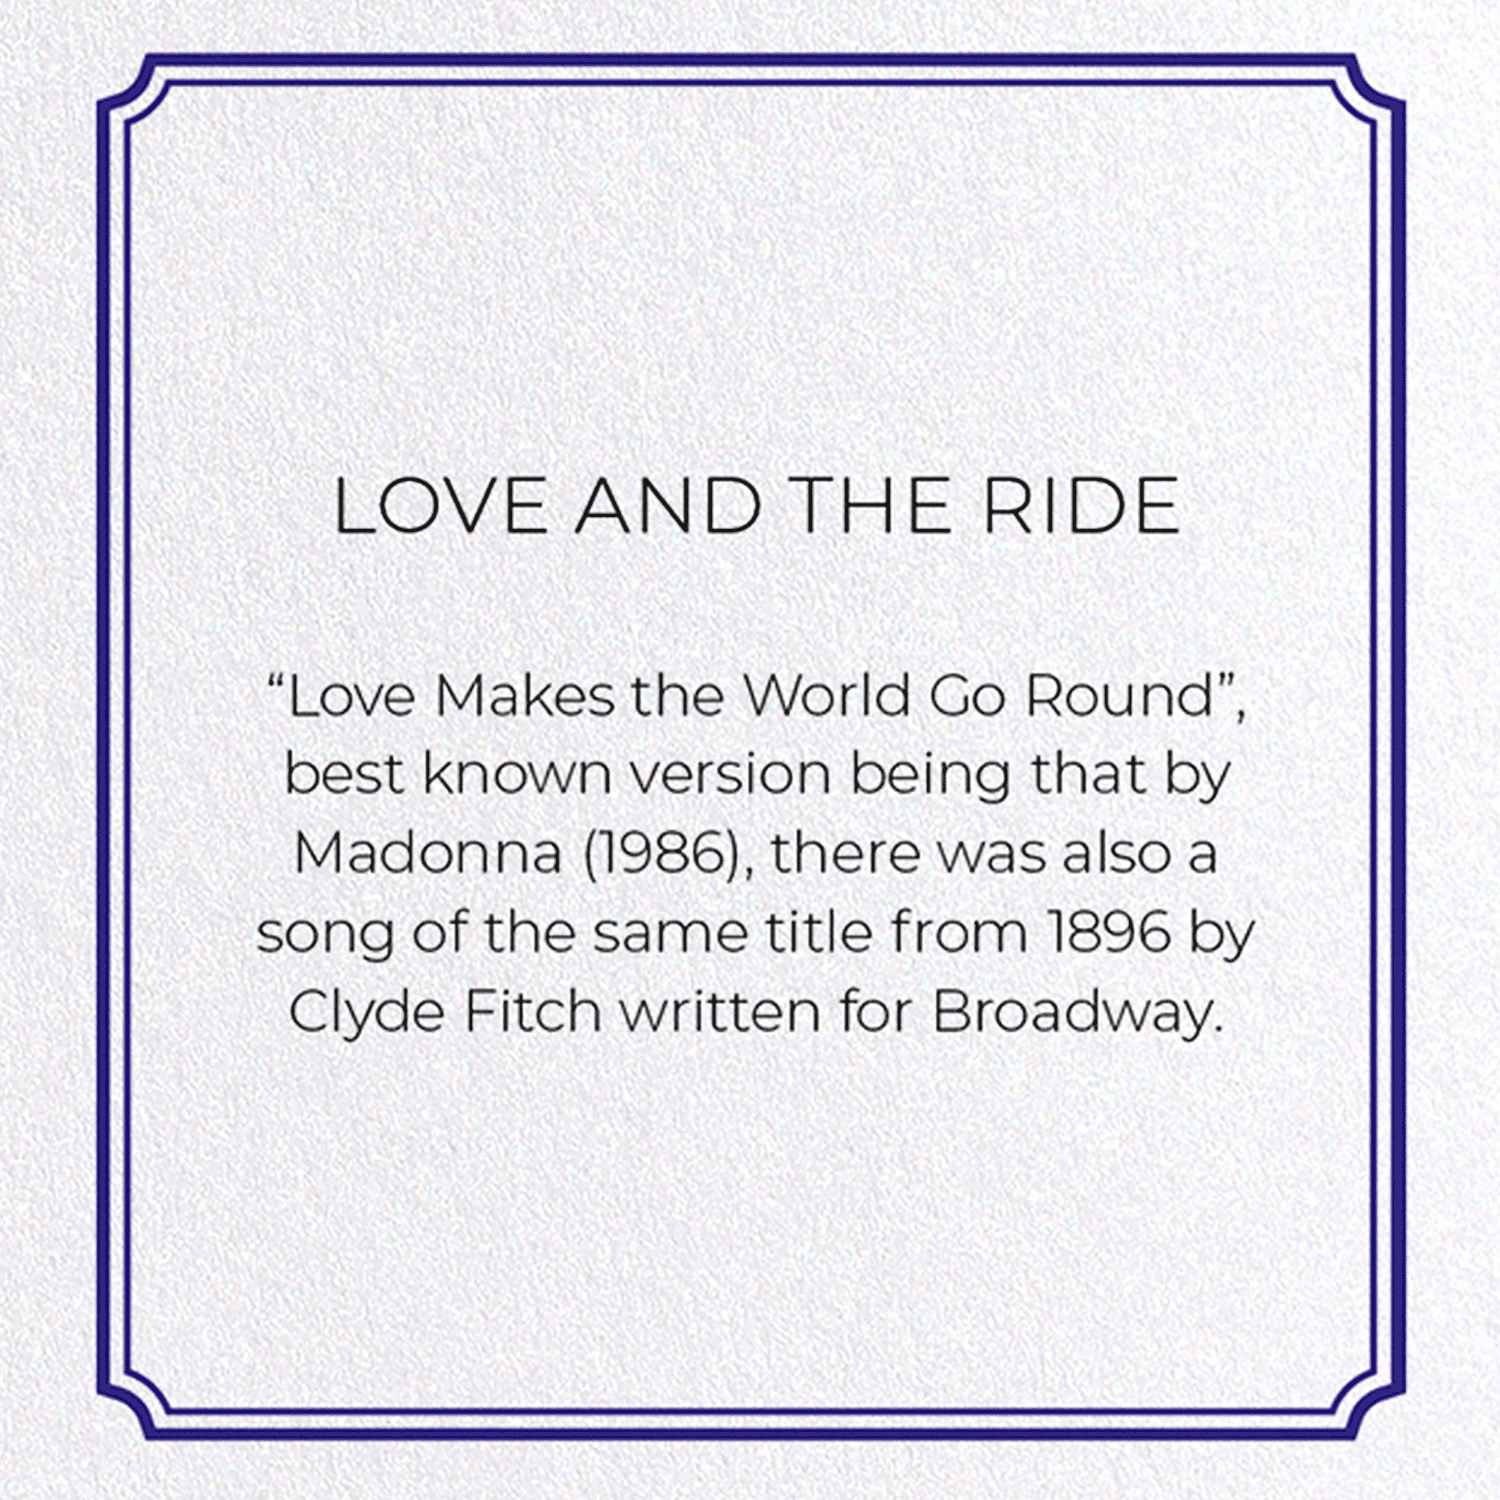 LOVE AND THE RIDE